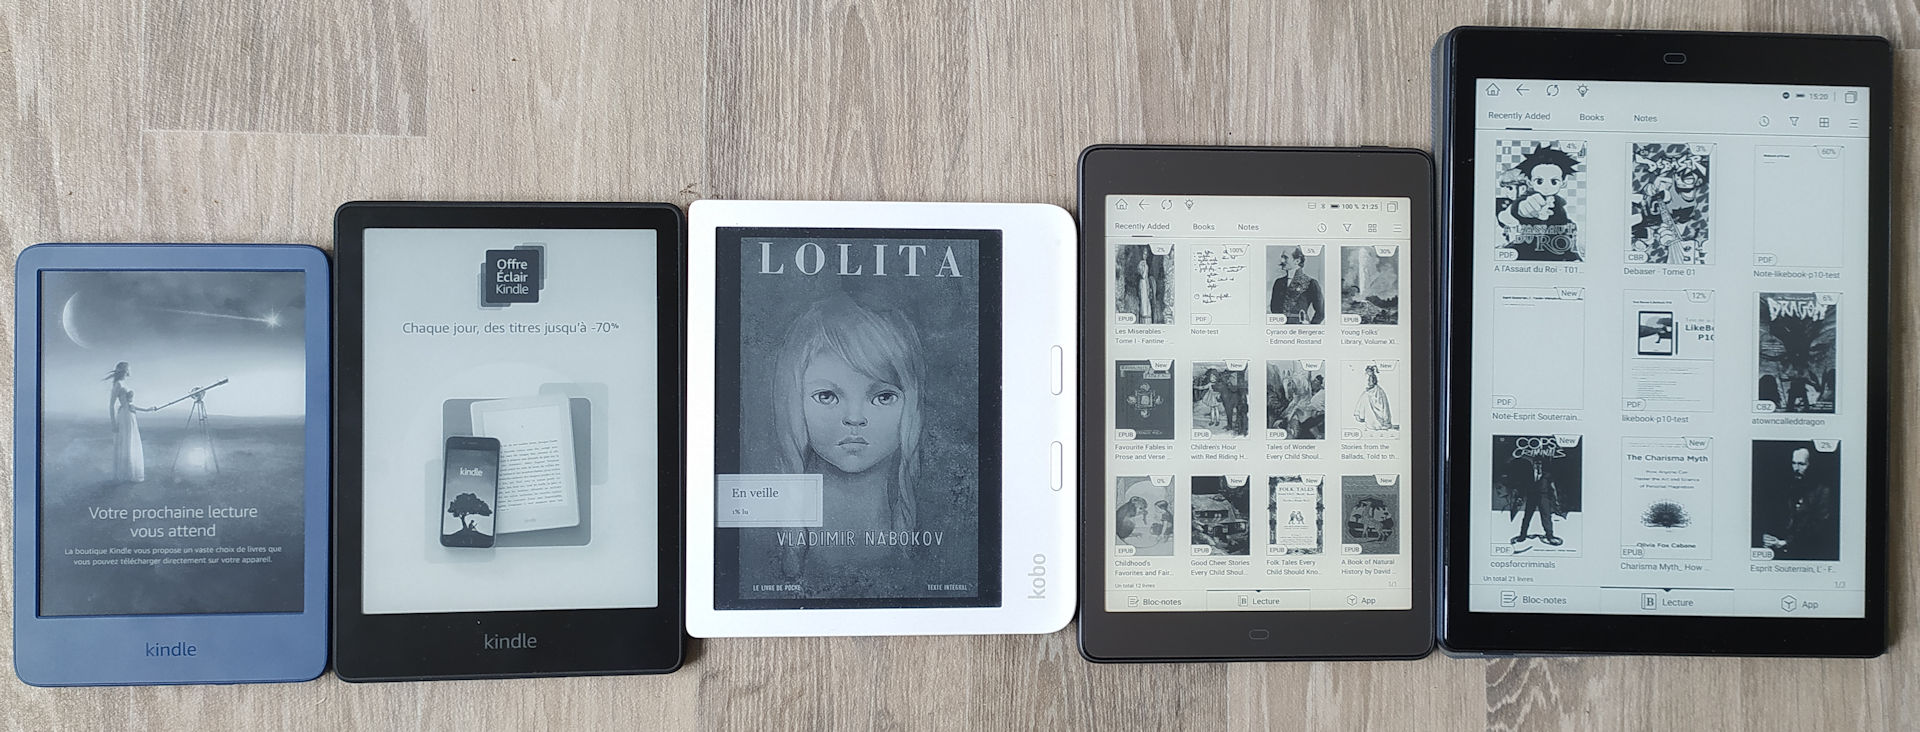 e-readers with e ink screen